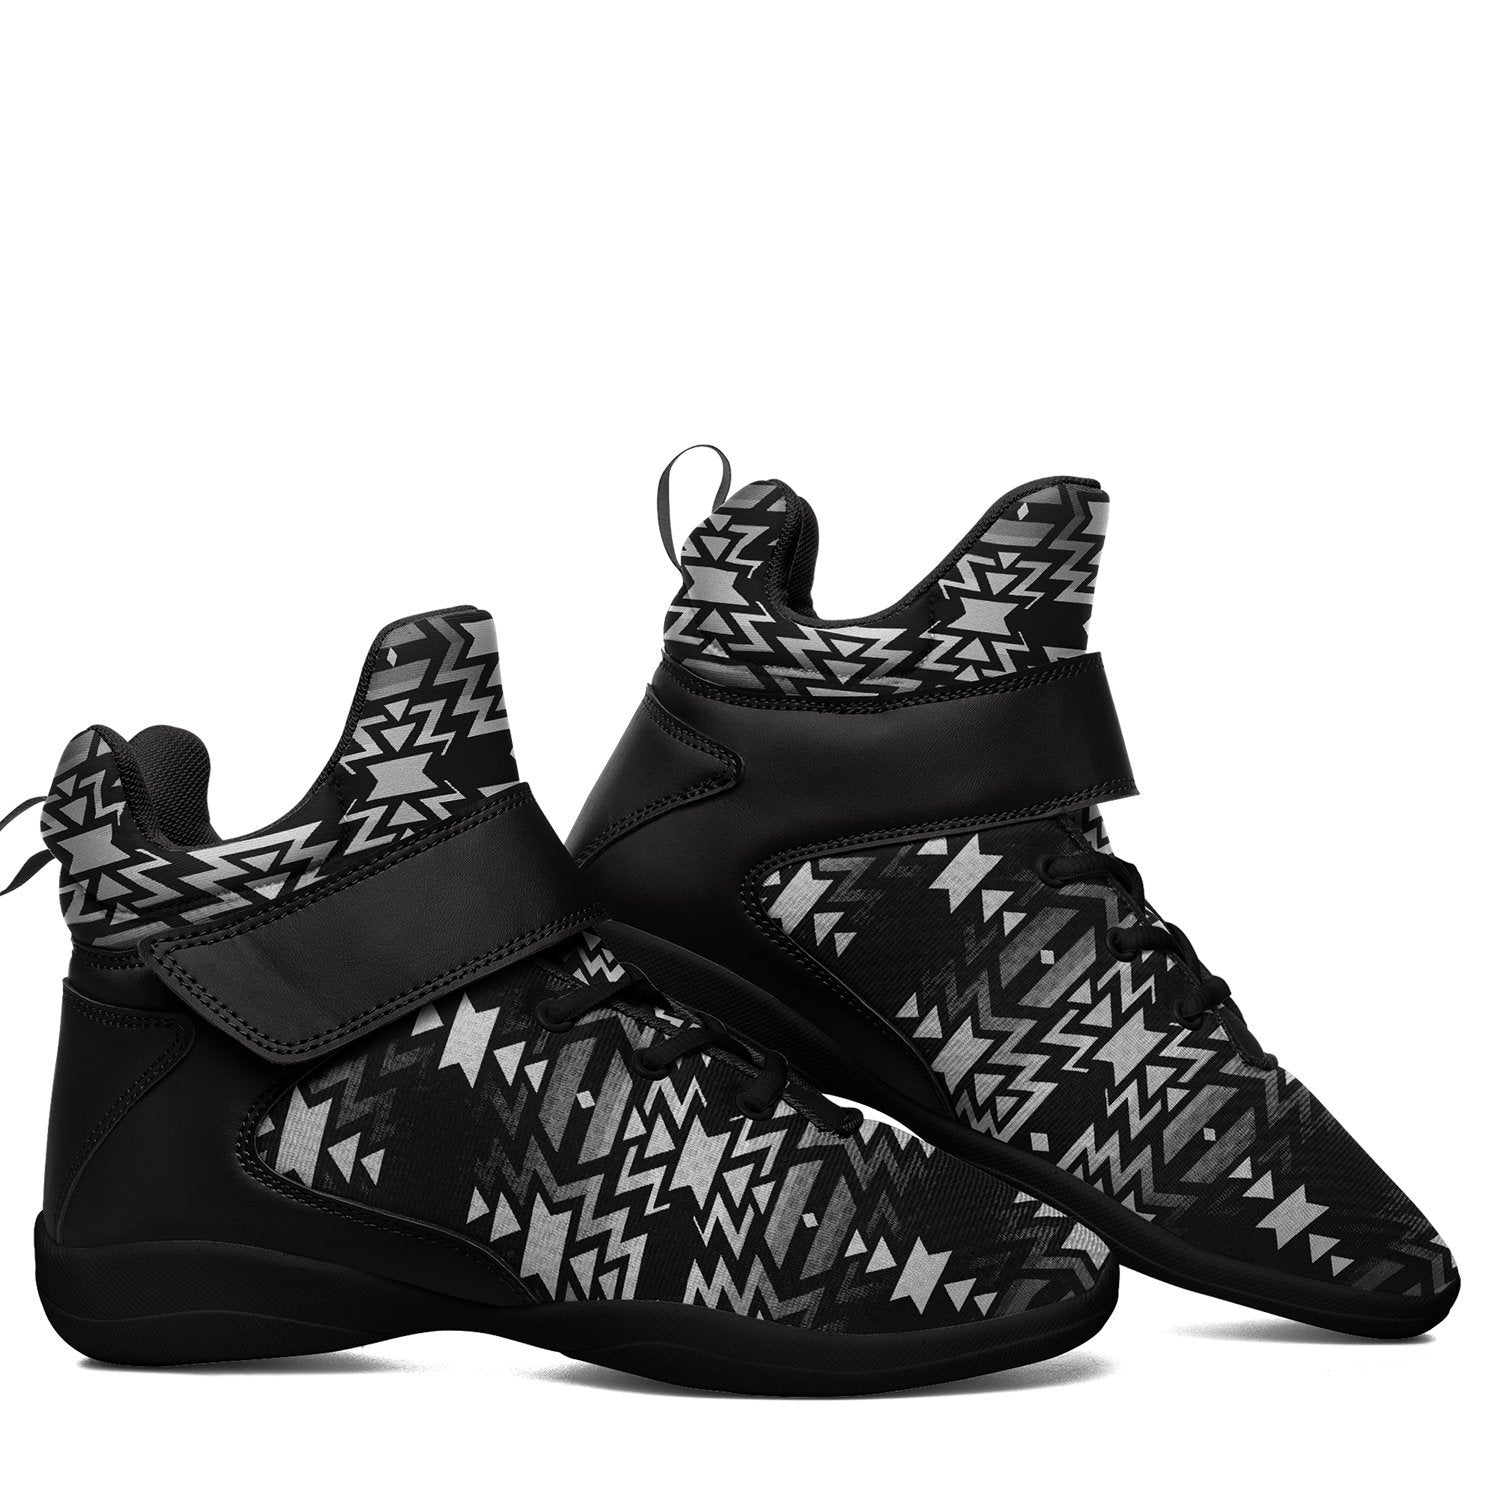 Black Fire Black and White Ipottaa Basketball / Sport High Top Shoes - Black Sole 49 Dzine 